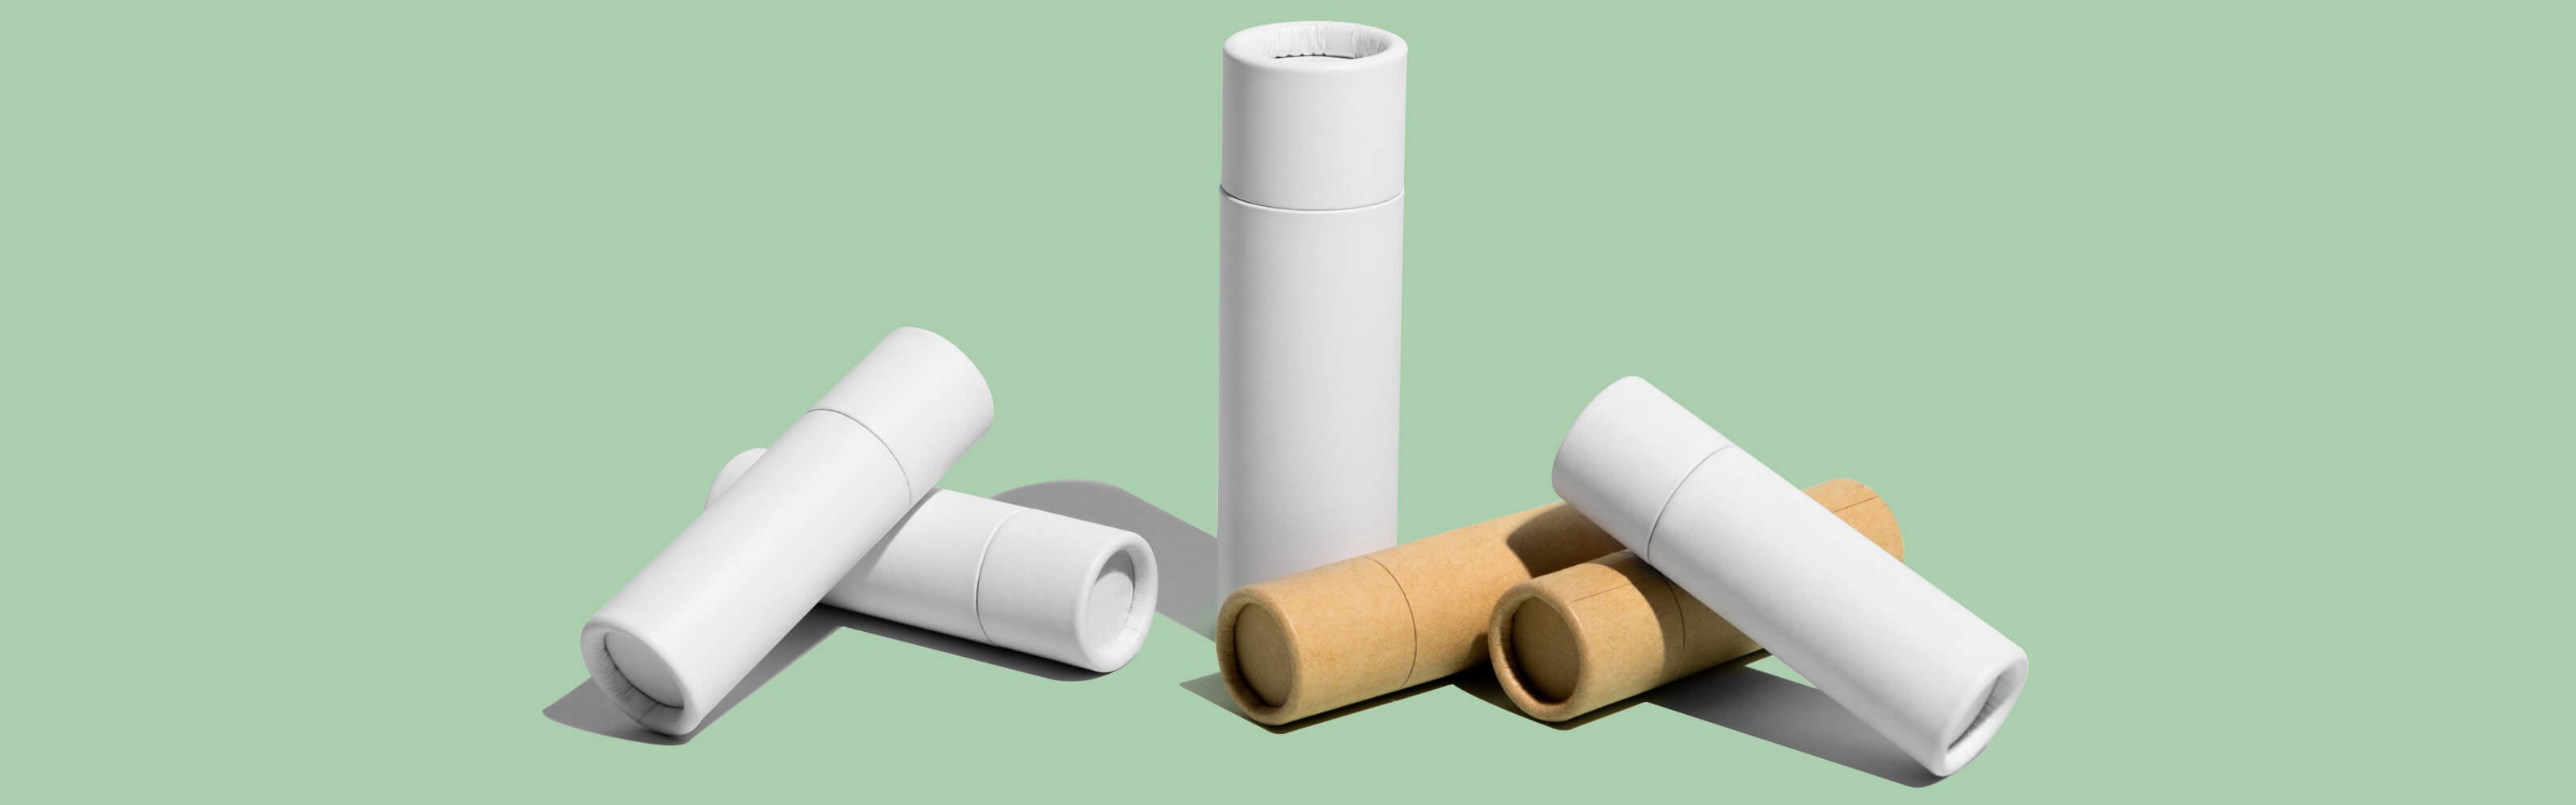 Assorted cylindrical paper tubes in natural cardboard and white colors on a pale green background, indicative of eco-friendly packaging options for cosmetics or personal care products.